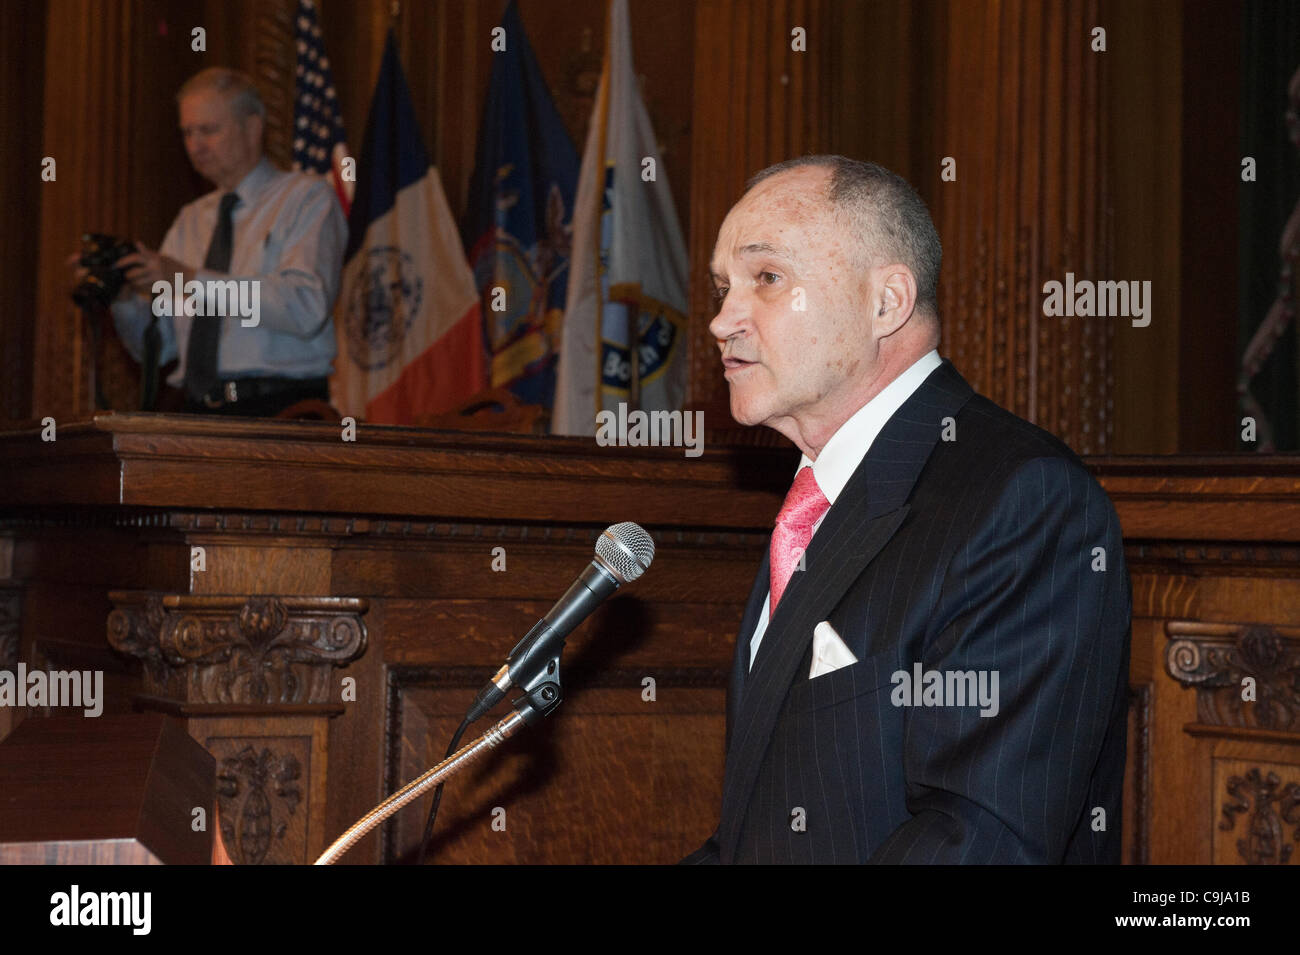 January 11, 2012 - Brooklyn, New York, USA: NYPD New York City Police Commissioner Raymond W. Kelly gives Keynote Speech at 2nd Annual Interfaith Memorial Service for Haiti, Wednesday night at Brooklyn Borough Hall, NYC. Stock Photo